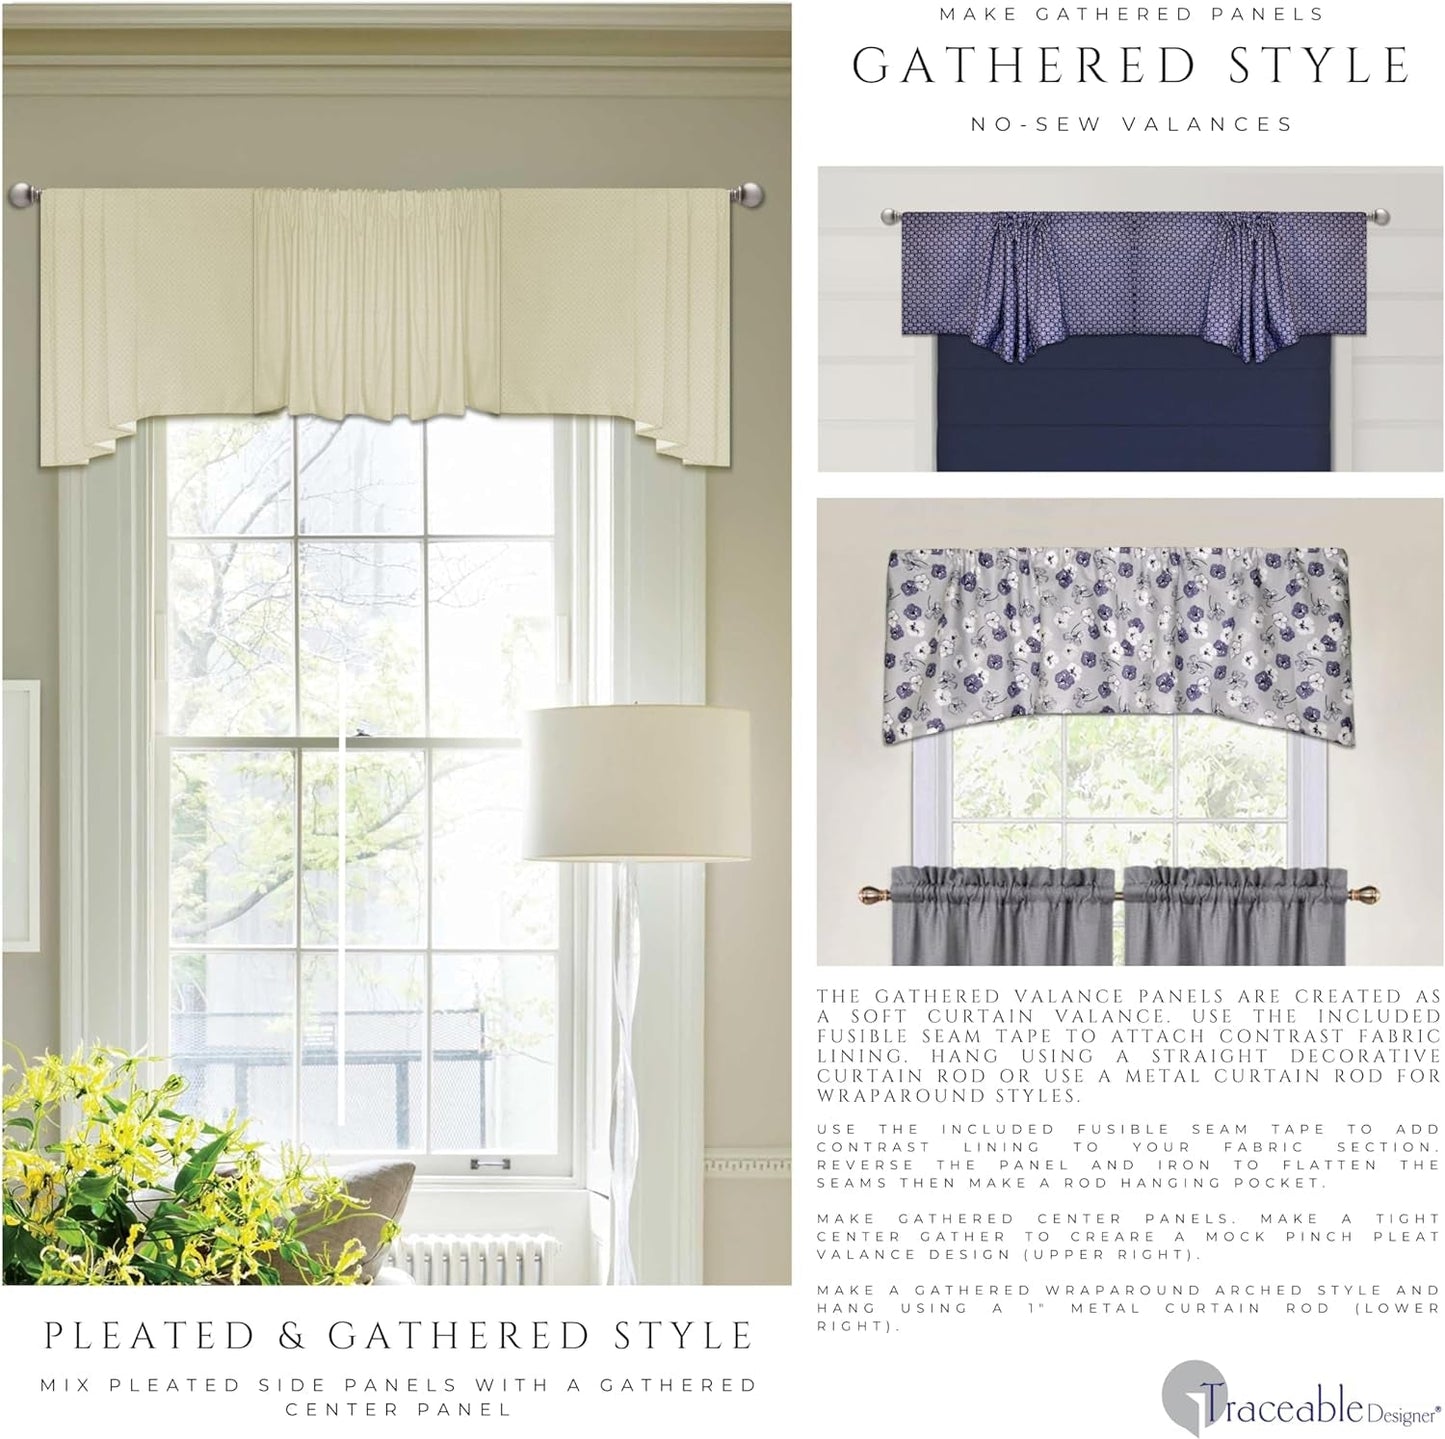 No-Sew Curtain Valance Kit, Reusable for DIY Window Treatments, Use a 1" Curtain Rod, Includes Cornice Style Options